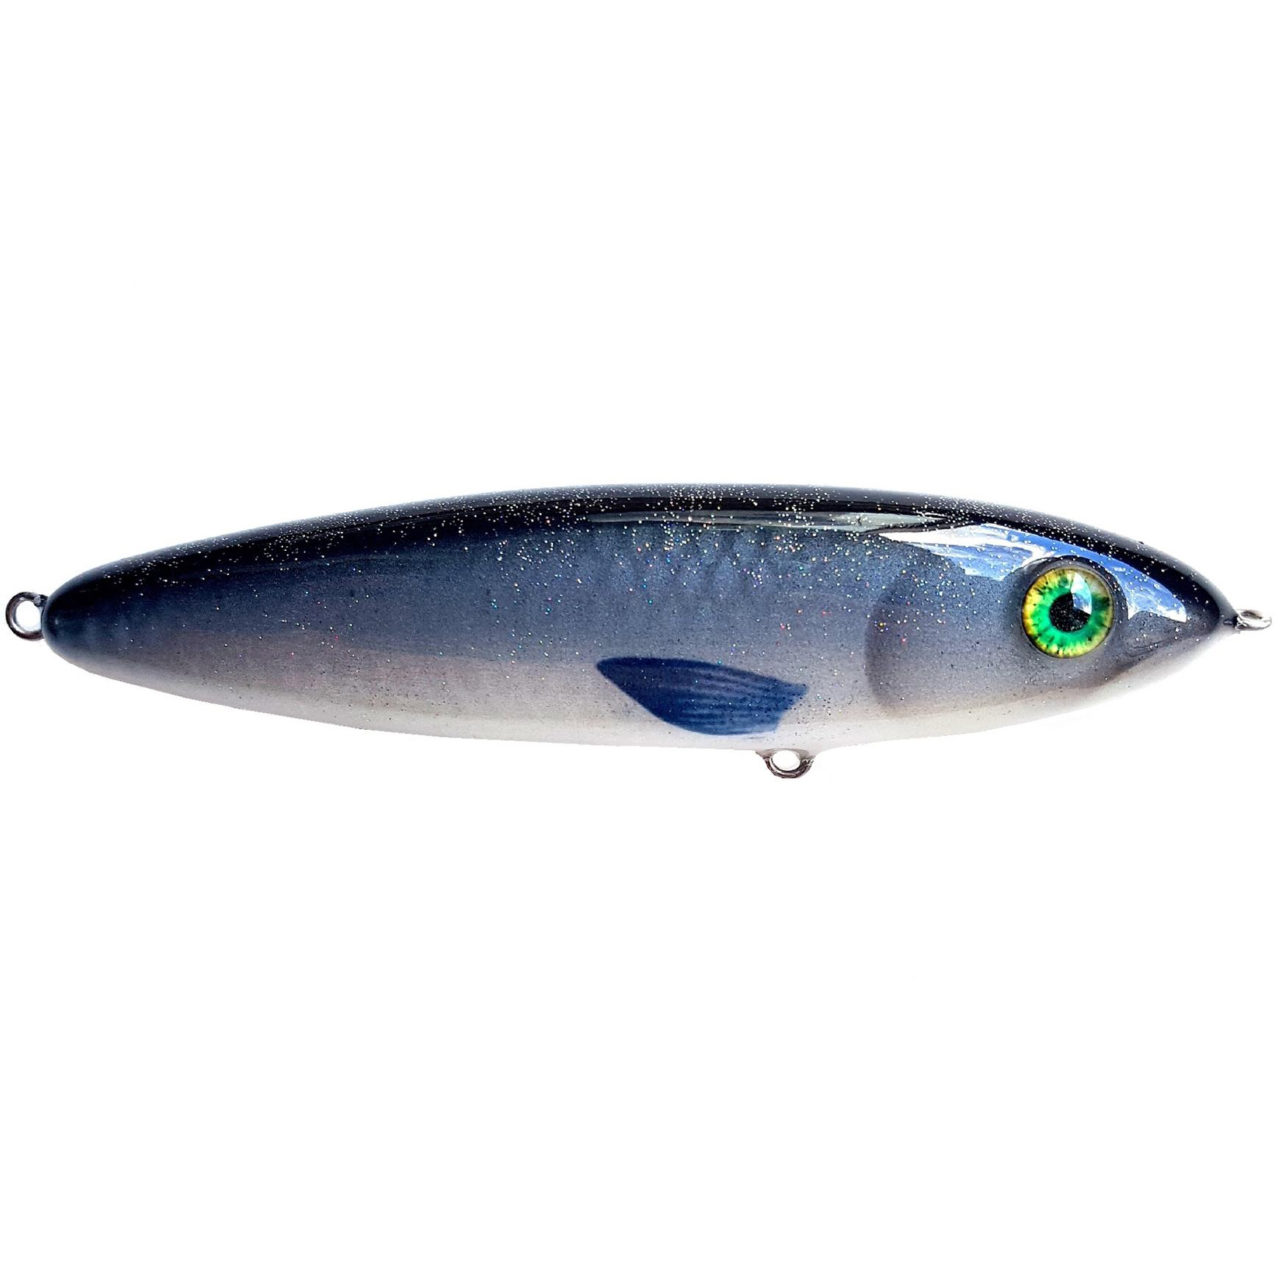 Tavrida Baits Scooter 170 Scooter Gray Fish